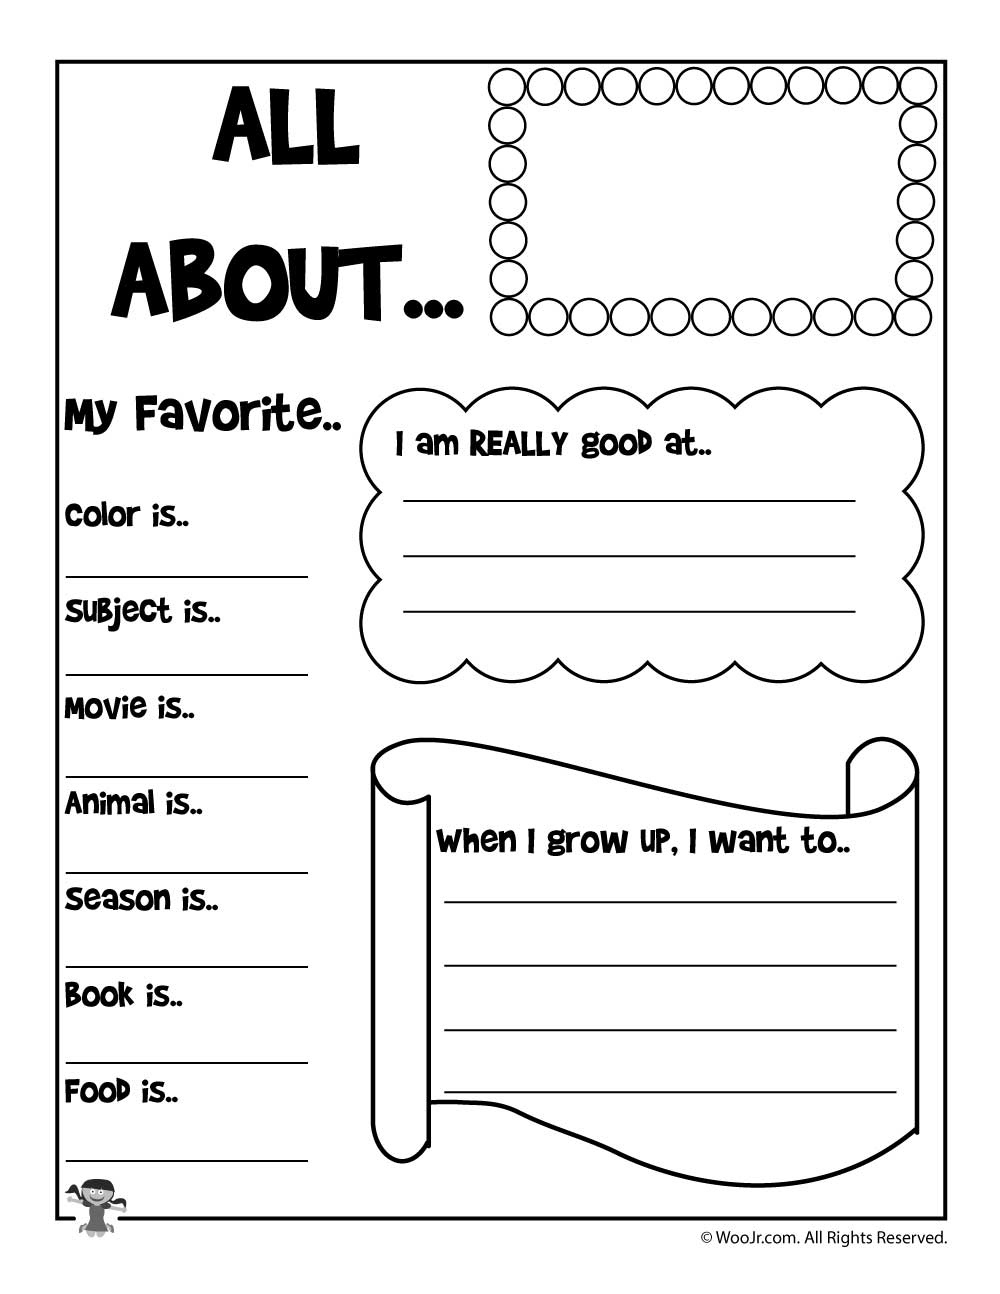 an-all-about-me-worksheet-with-four-pencils-and-the-words-my-favorite-is